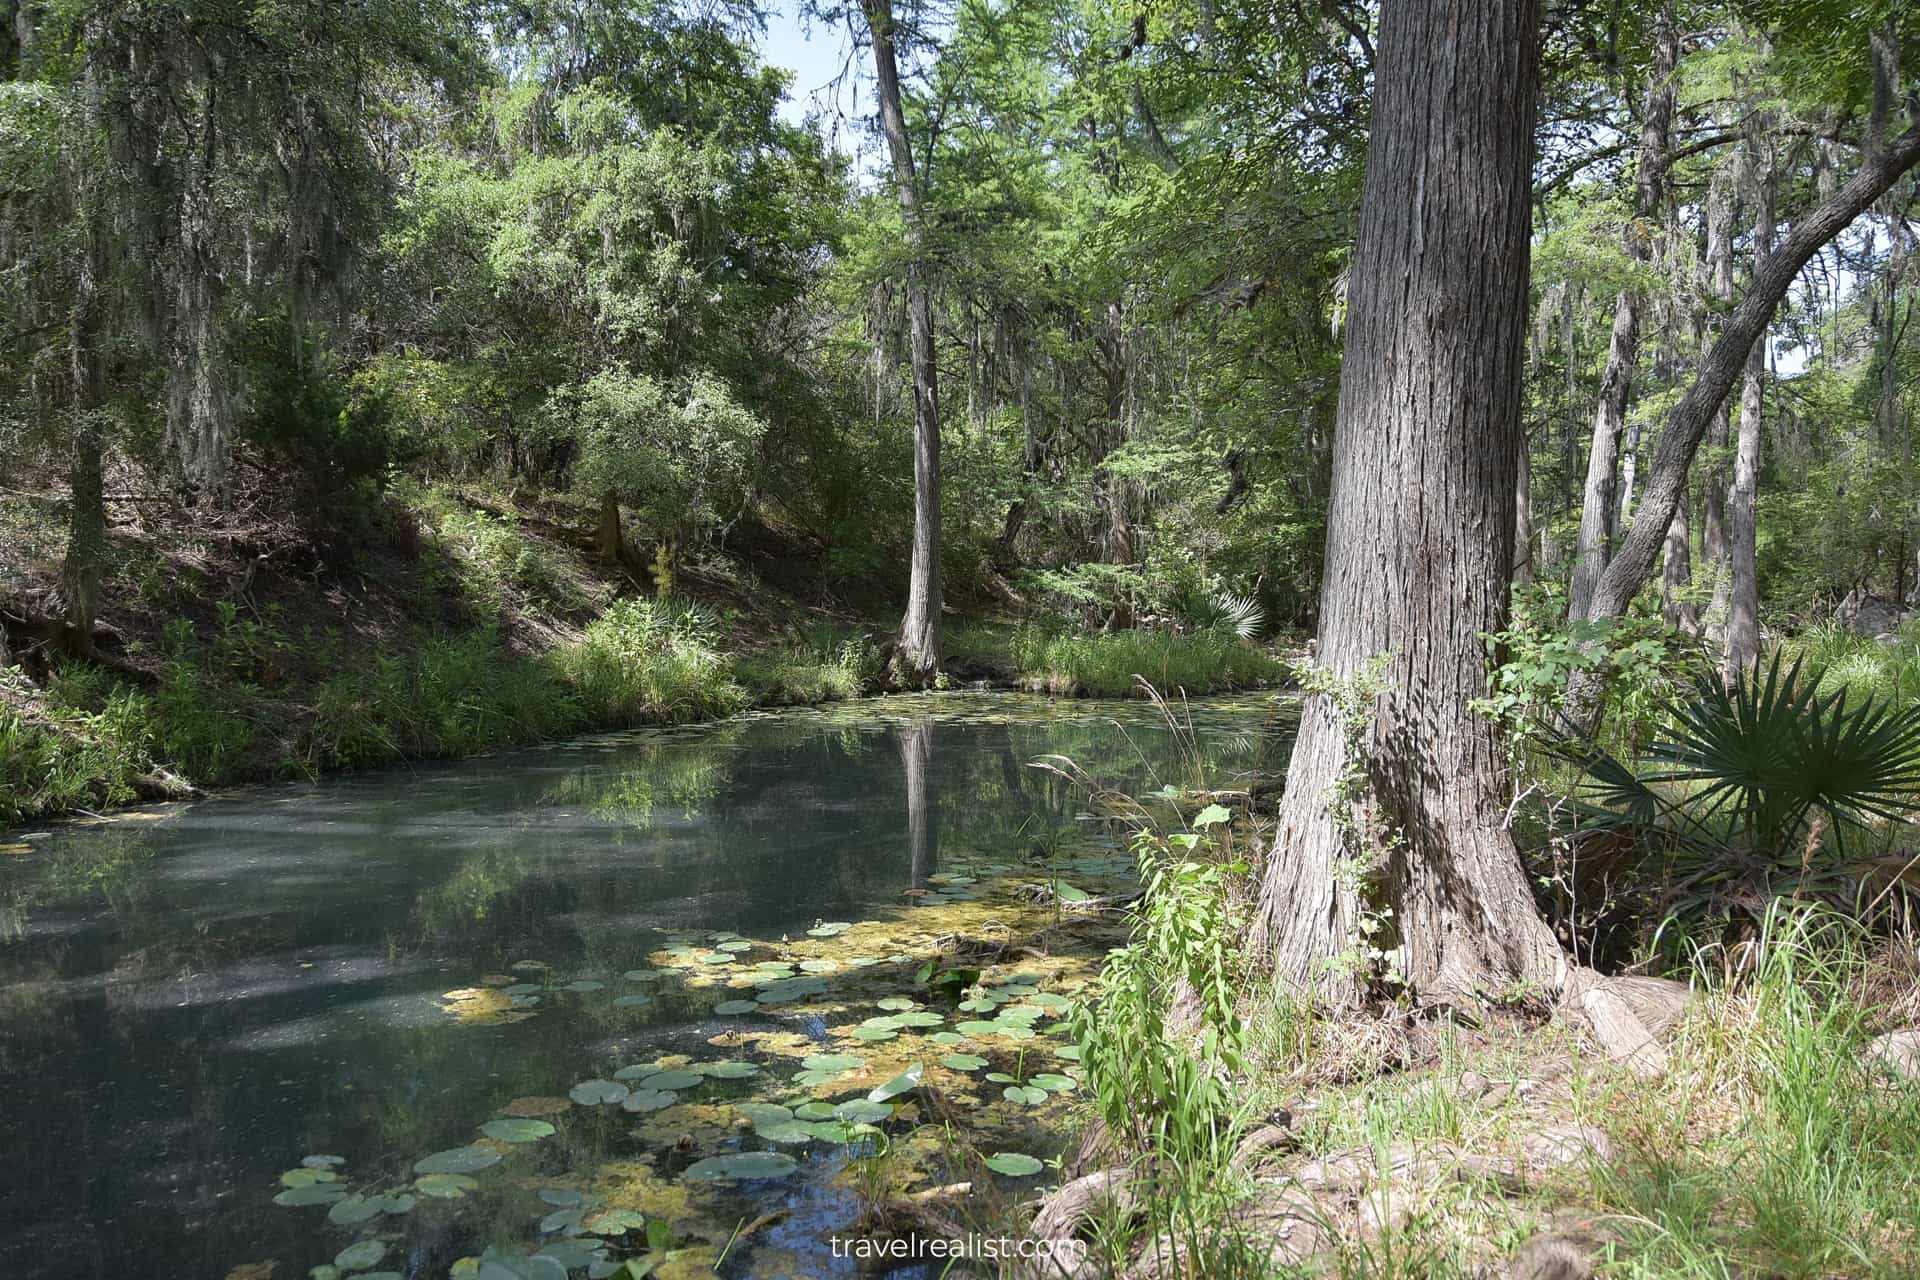 Honey Creek Guided Walk: Learn About Texas Nature & Wildlife